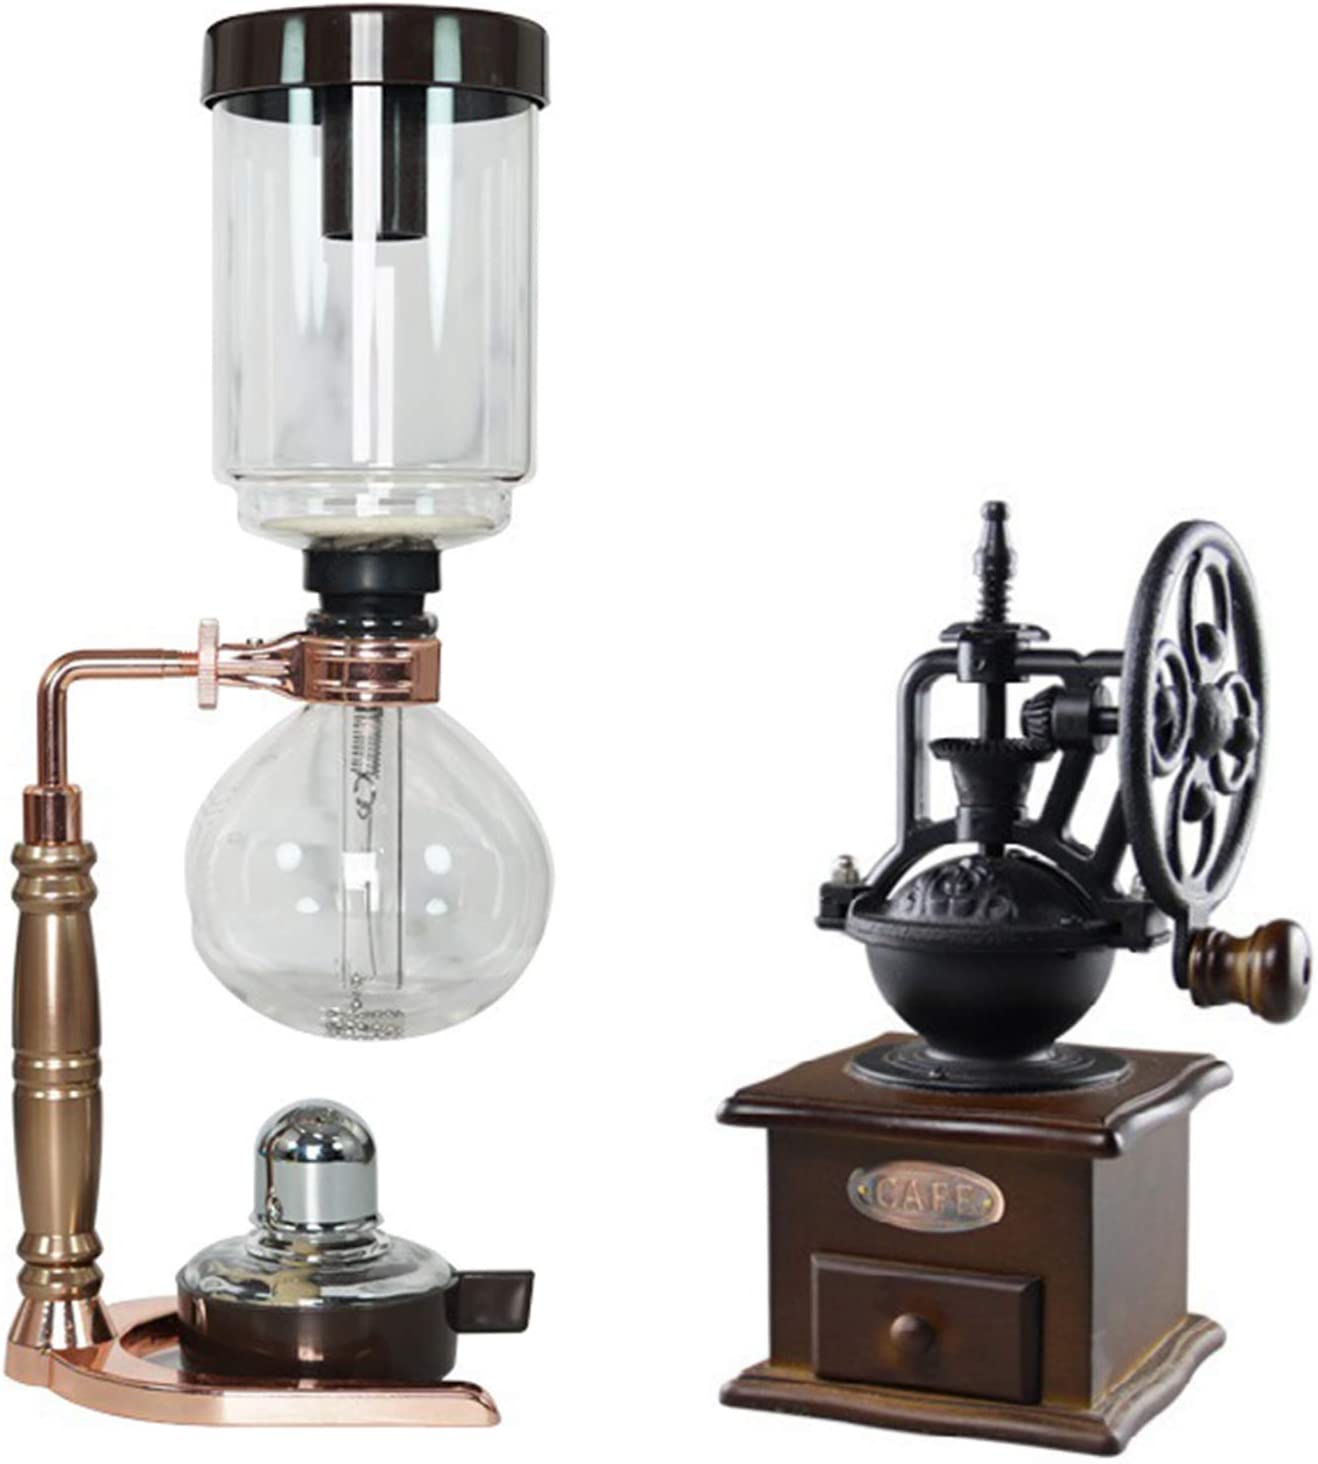 BNMY Manual Coffee Grinder Siphon Coffee Pot Set Siphon Coffee Machine 3 Cups Vacuum Coffee Machines Gold